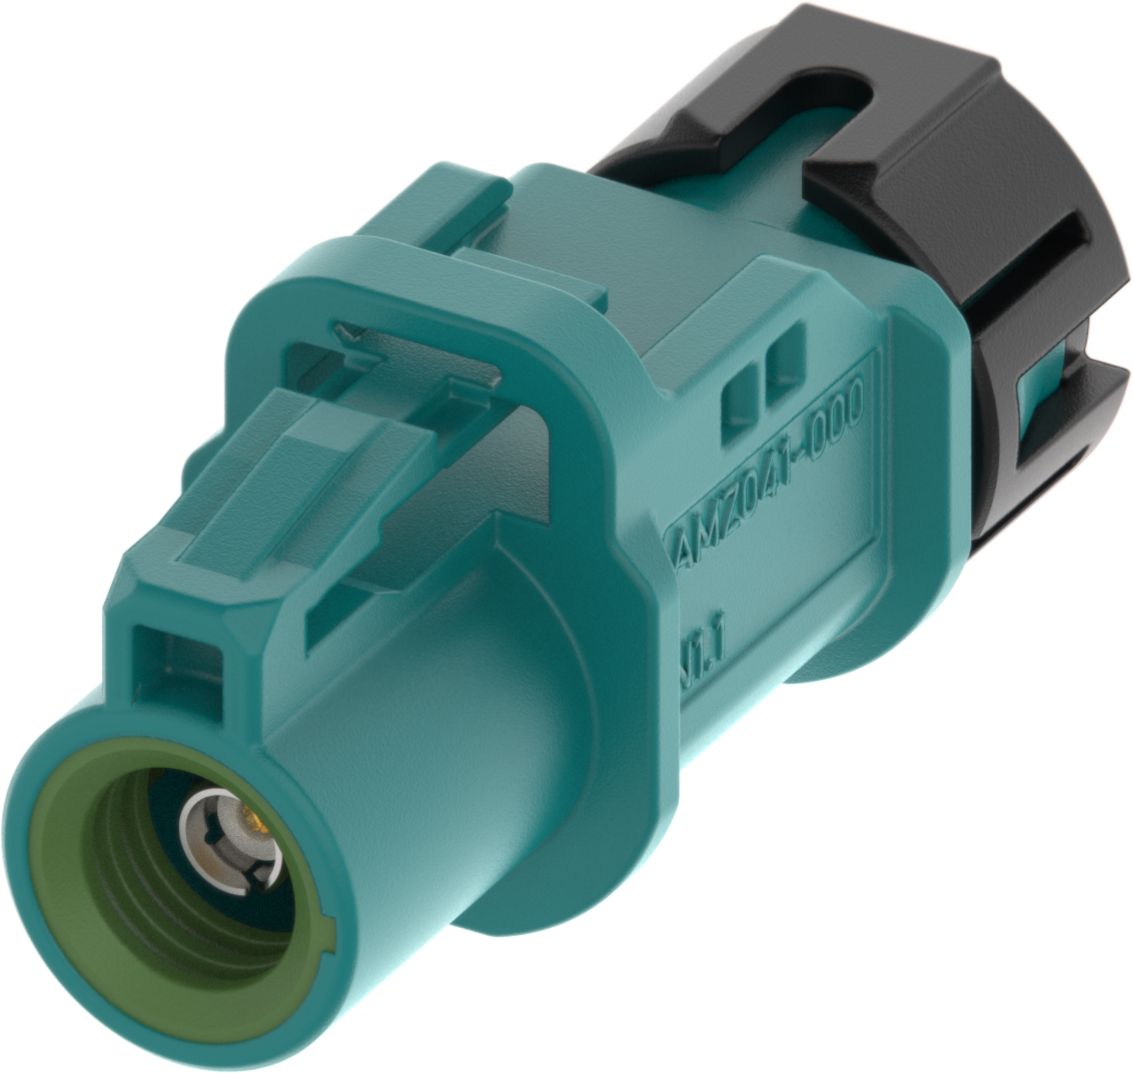 AMK141-103Z5-Y straight jack waterproof | Connectors | Radio Frequency |  Rosenberger Product Catalog